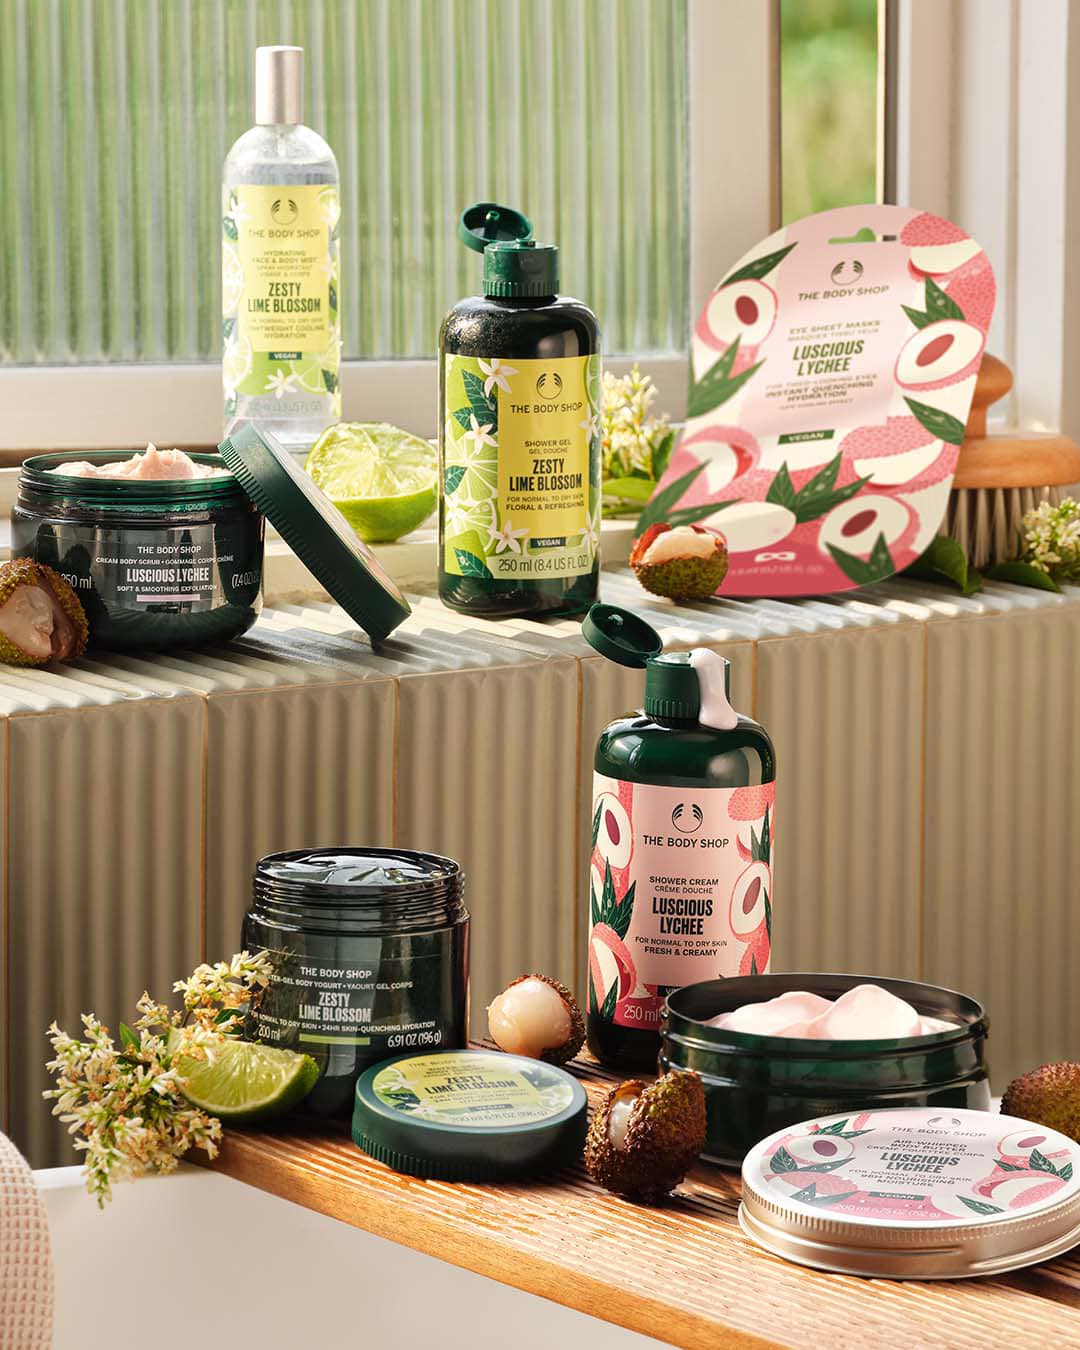 Zesty Lime Blossom and Luscious Lychee products from The Body Shop are displayed.